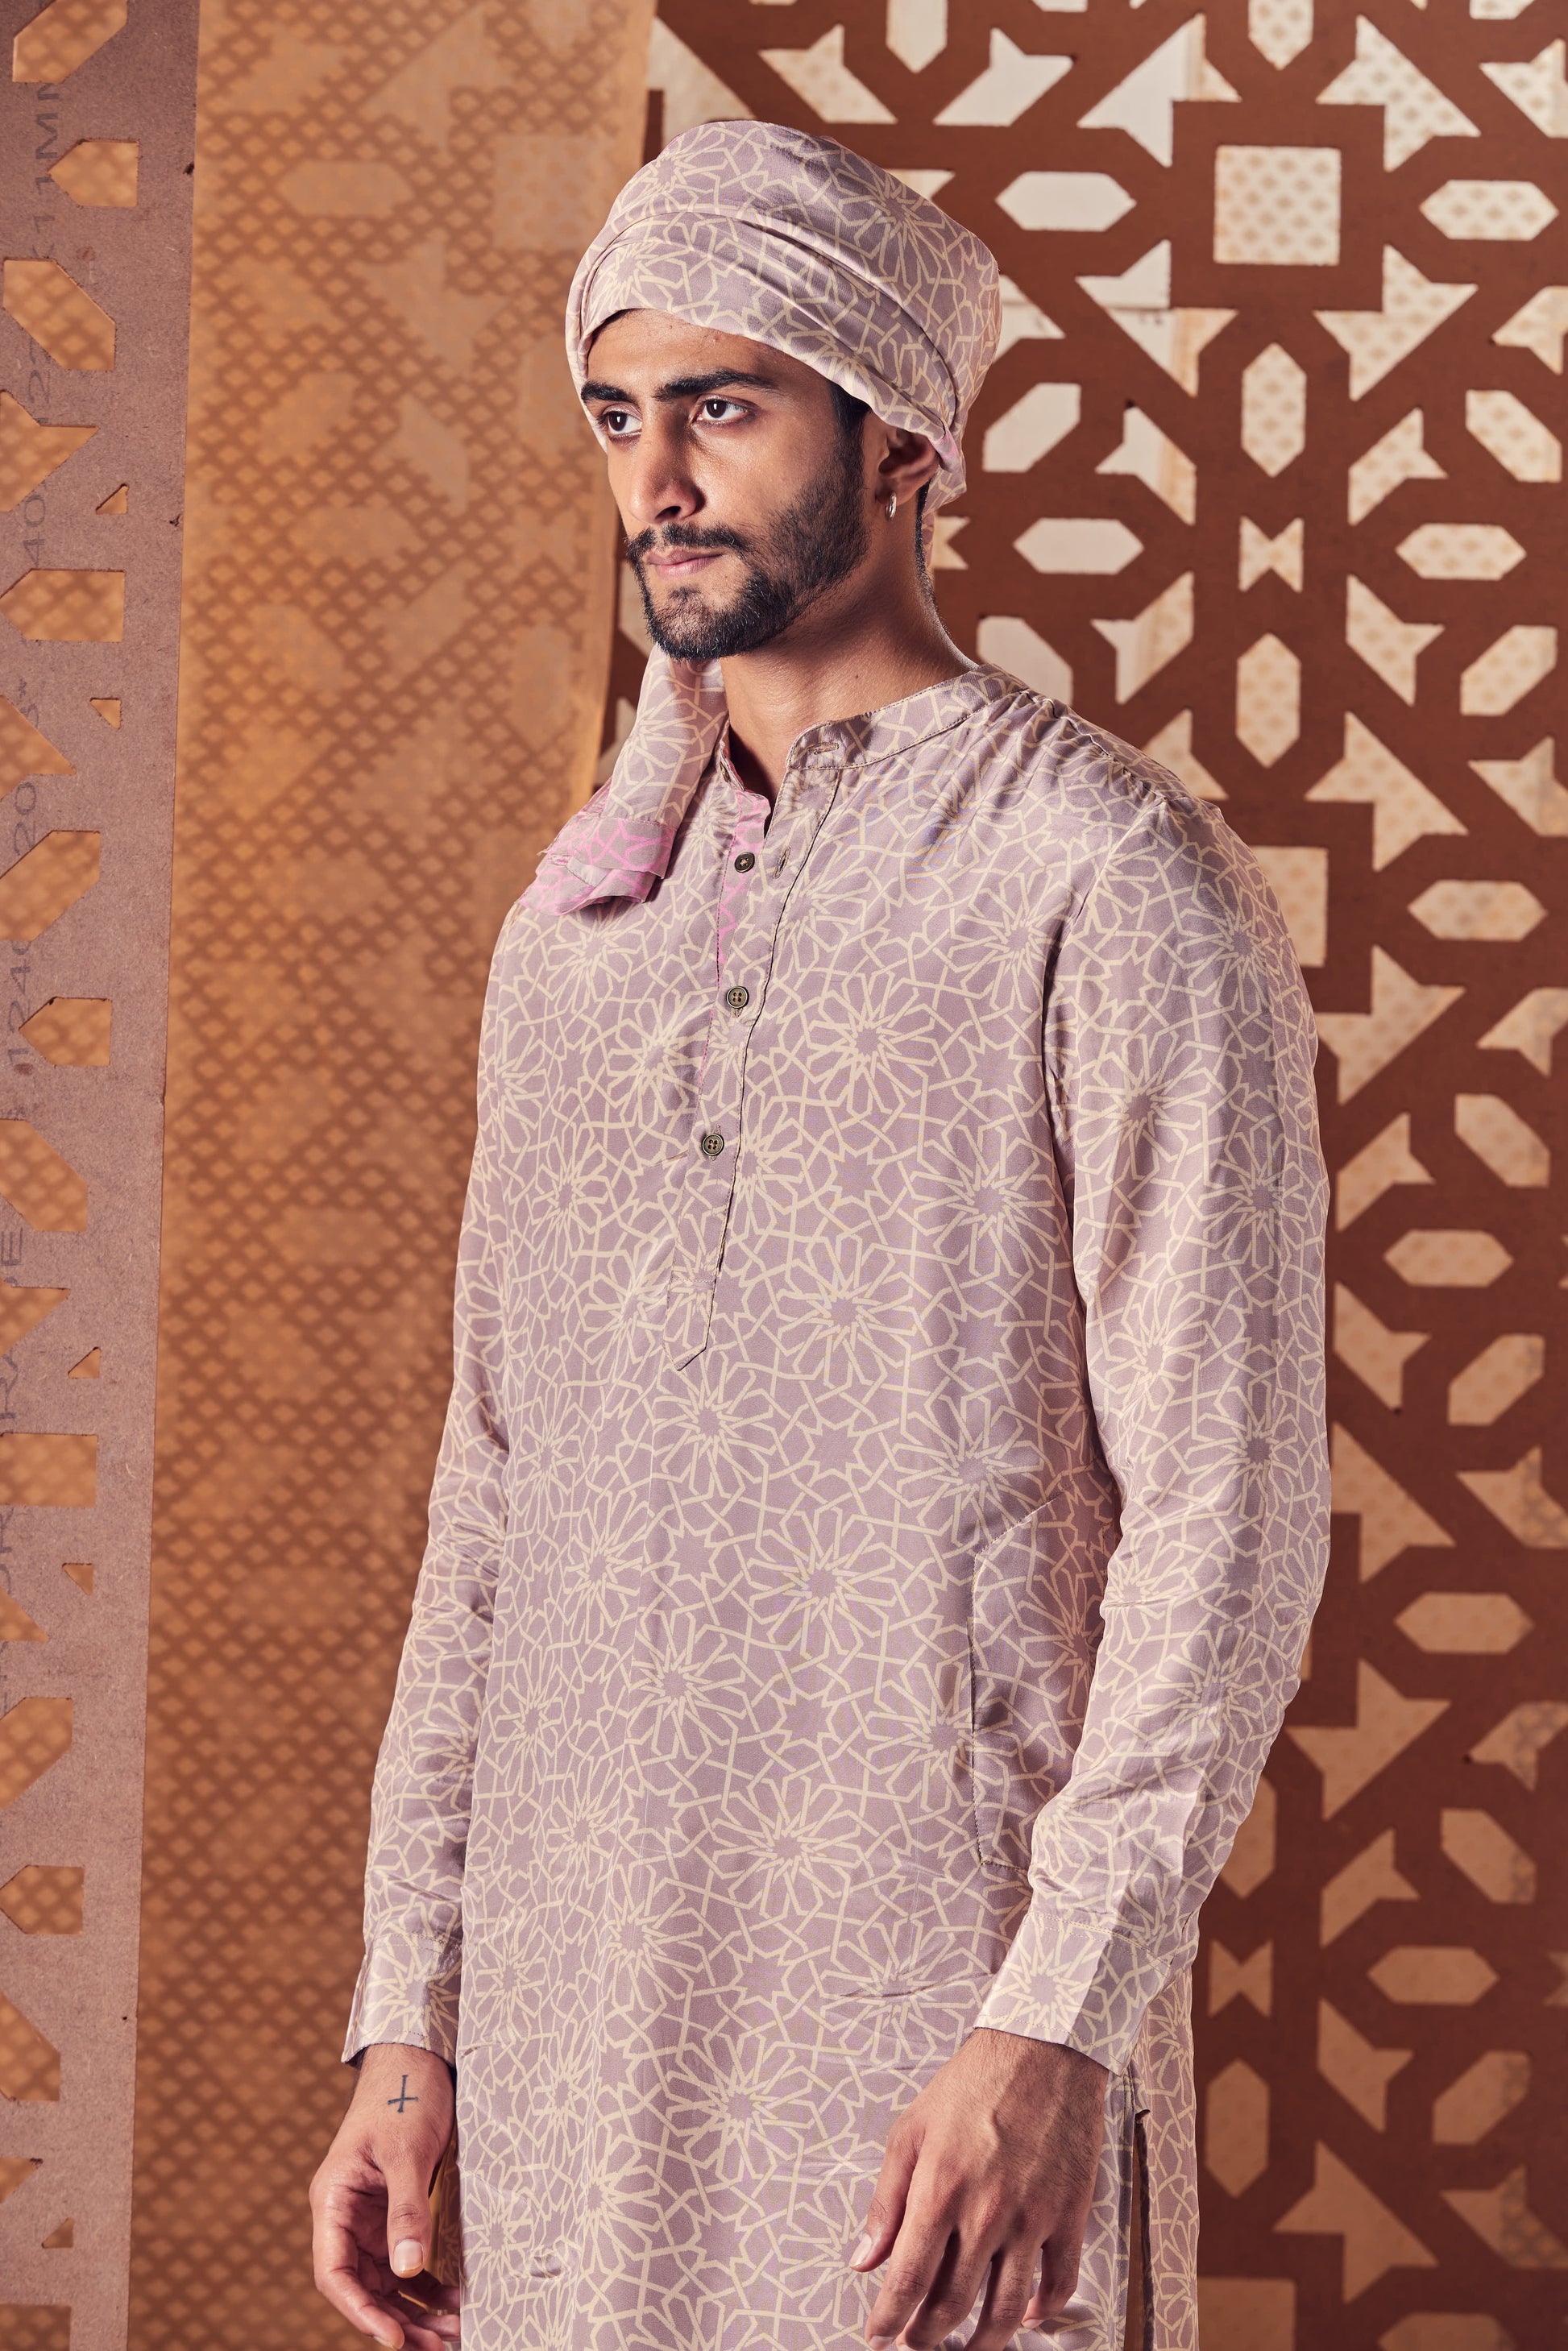 Men's Printed Kurta with Pant - Set of 2 at Kamakhyaa by Charkhee. This item is Beige, Cotton, Crepe, Embroidered, Ethnic Wear, Kurta Pant Sets, Mens Co-ords, Menswear, Naayaab, Natural, Nayaab, Poplin, Relaxed Fit